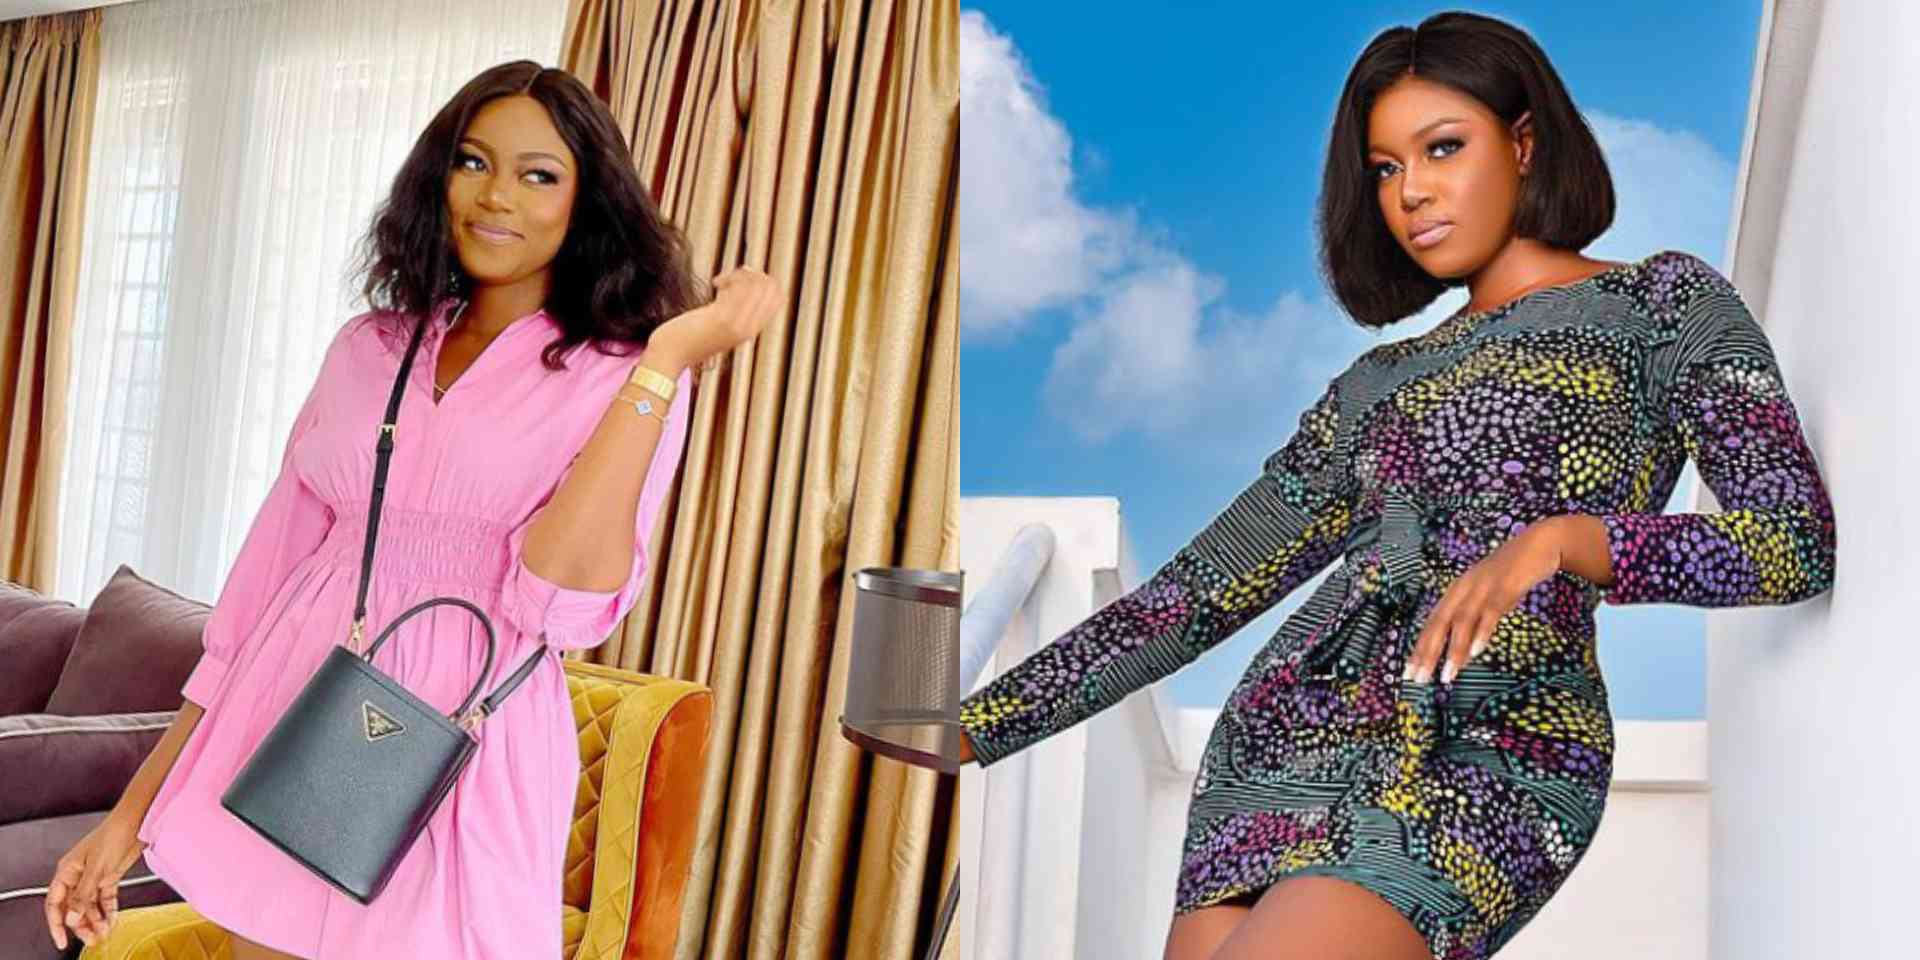 "Surgeries won’t keep that man, neither will it solve your insecurities" - Yvonne Nelson tells women